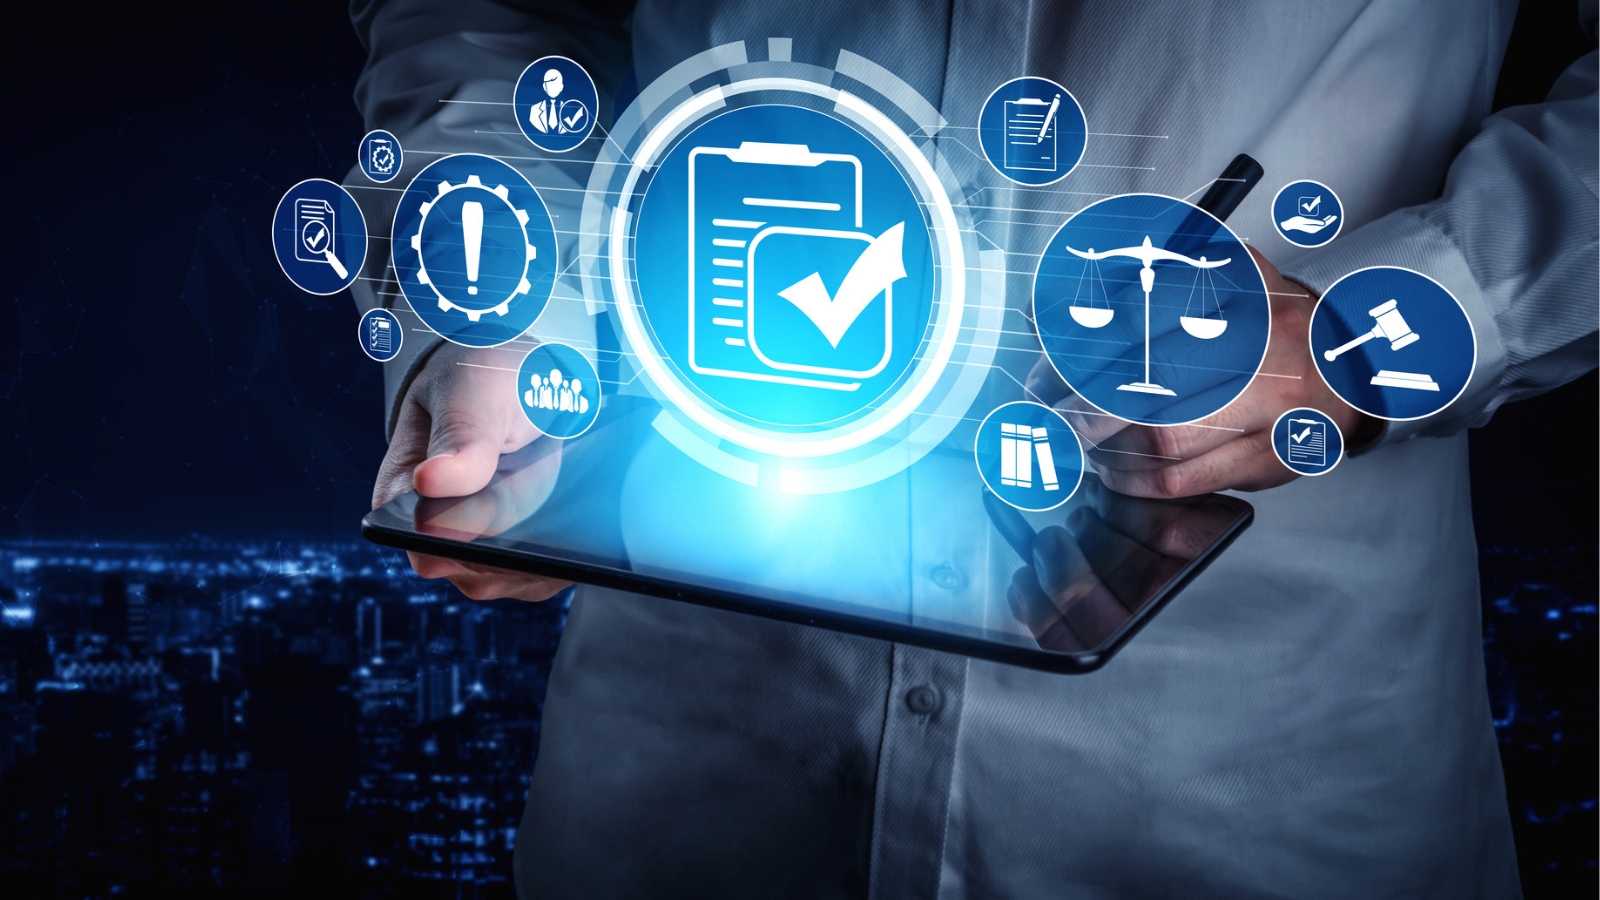 A person holding a tablet with brightly lit icons representing law, trust, compliance